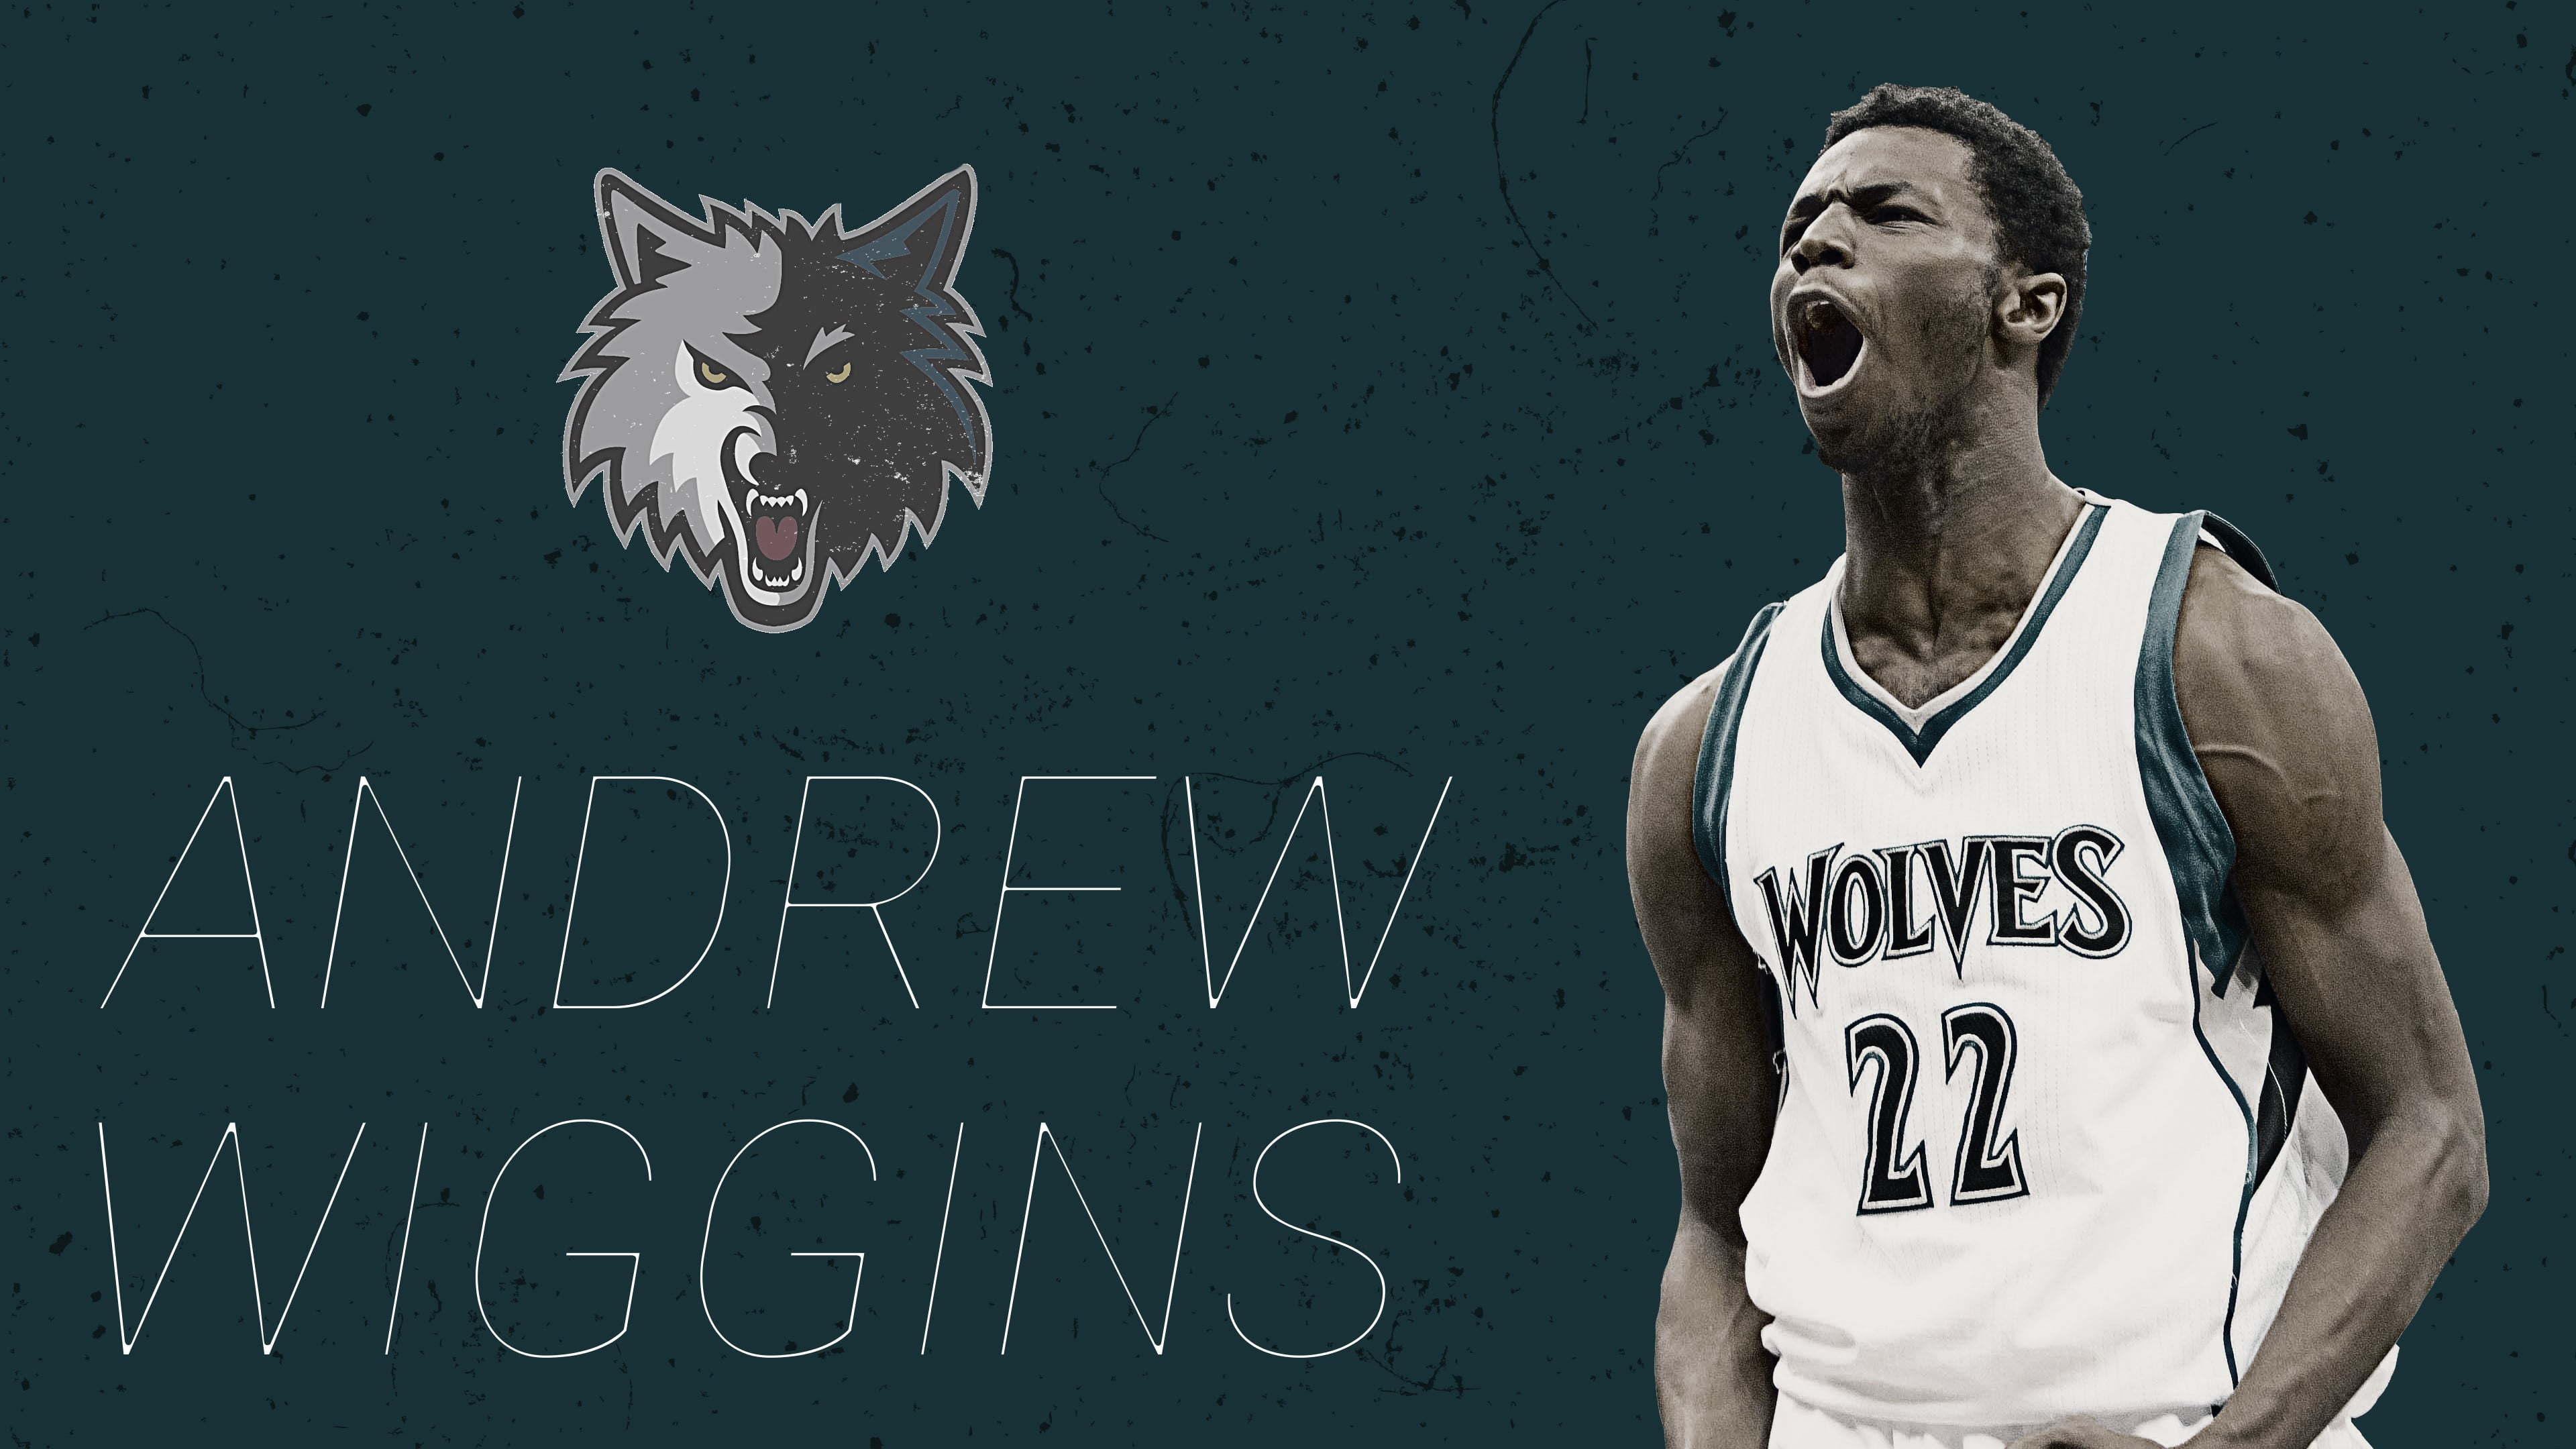 Big Game Wiggins Is Making Everyone Forget About the Years of Wasted  Minutes  The Ringer